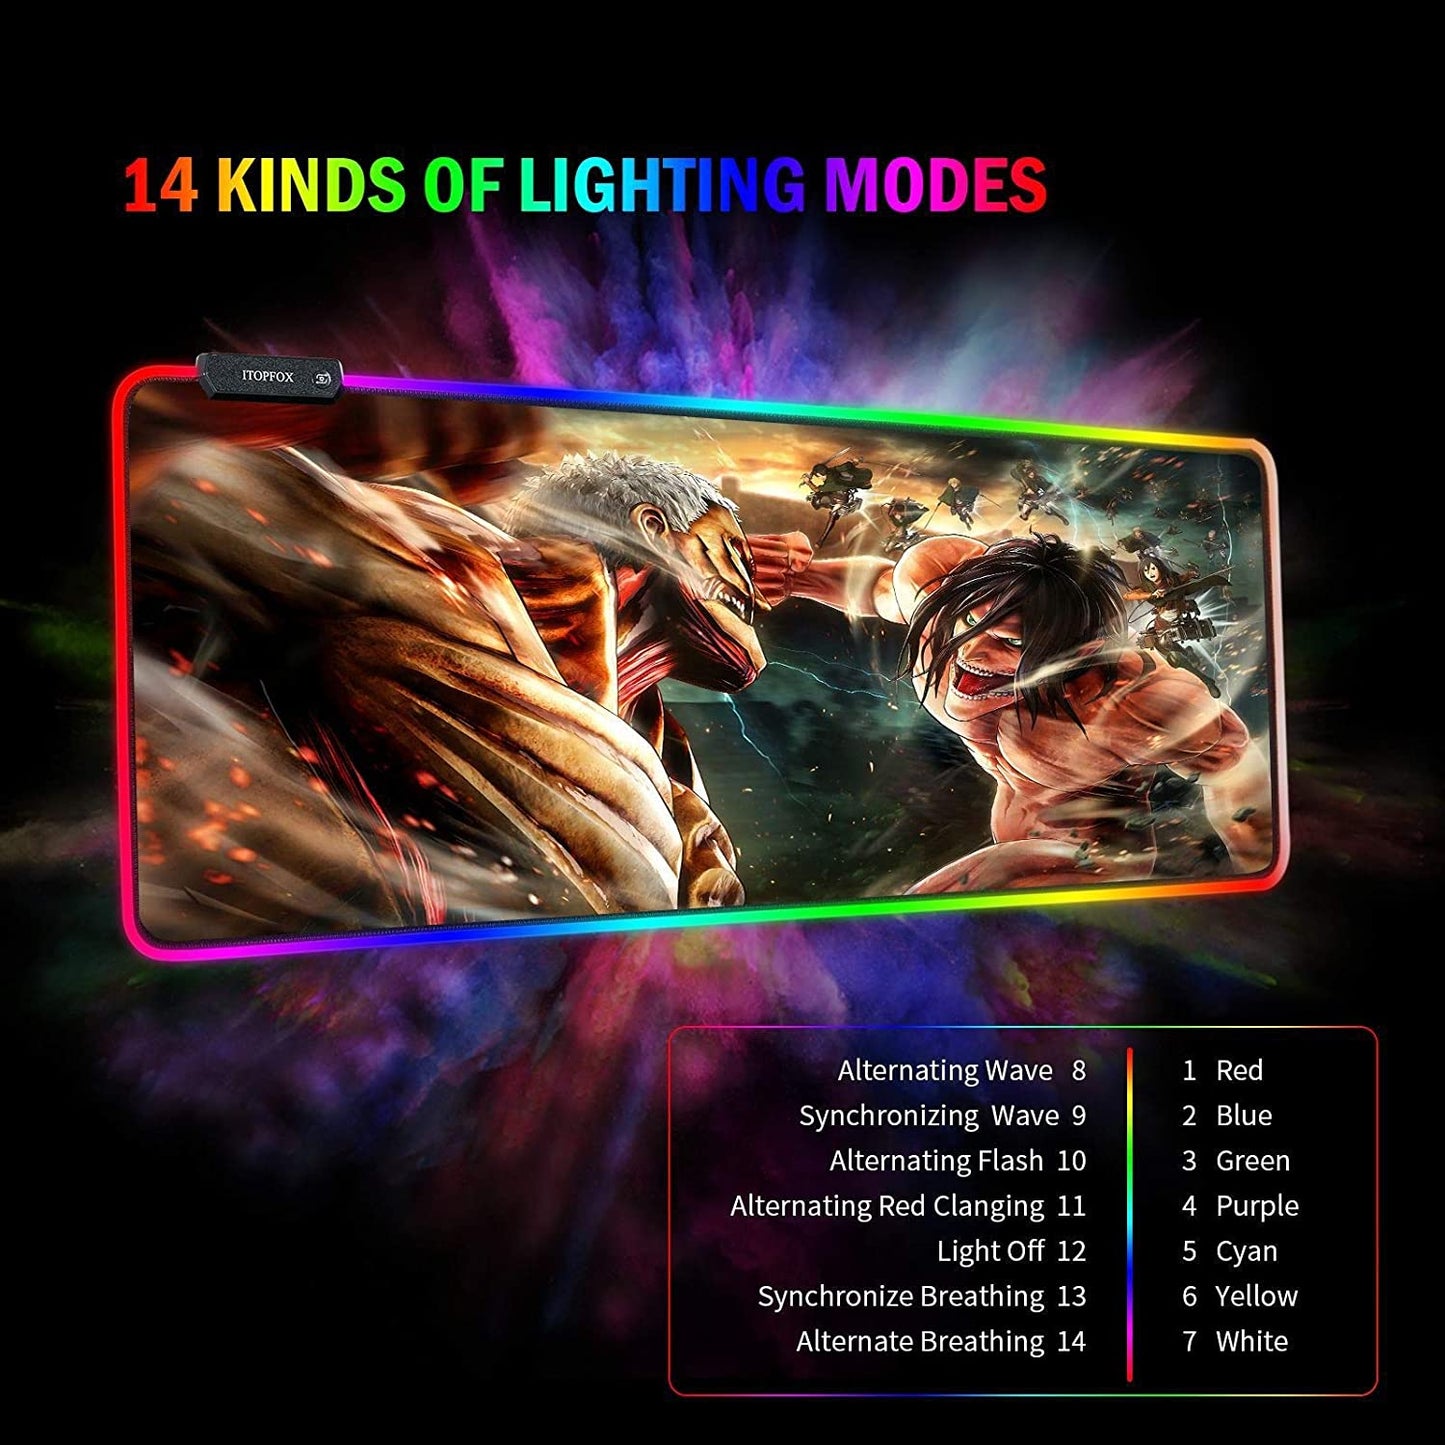 Attack on Titan RGB Gaming Mouse Pad – 80×30 CM